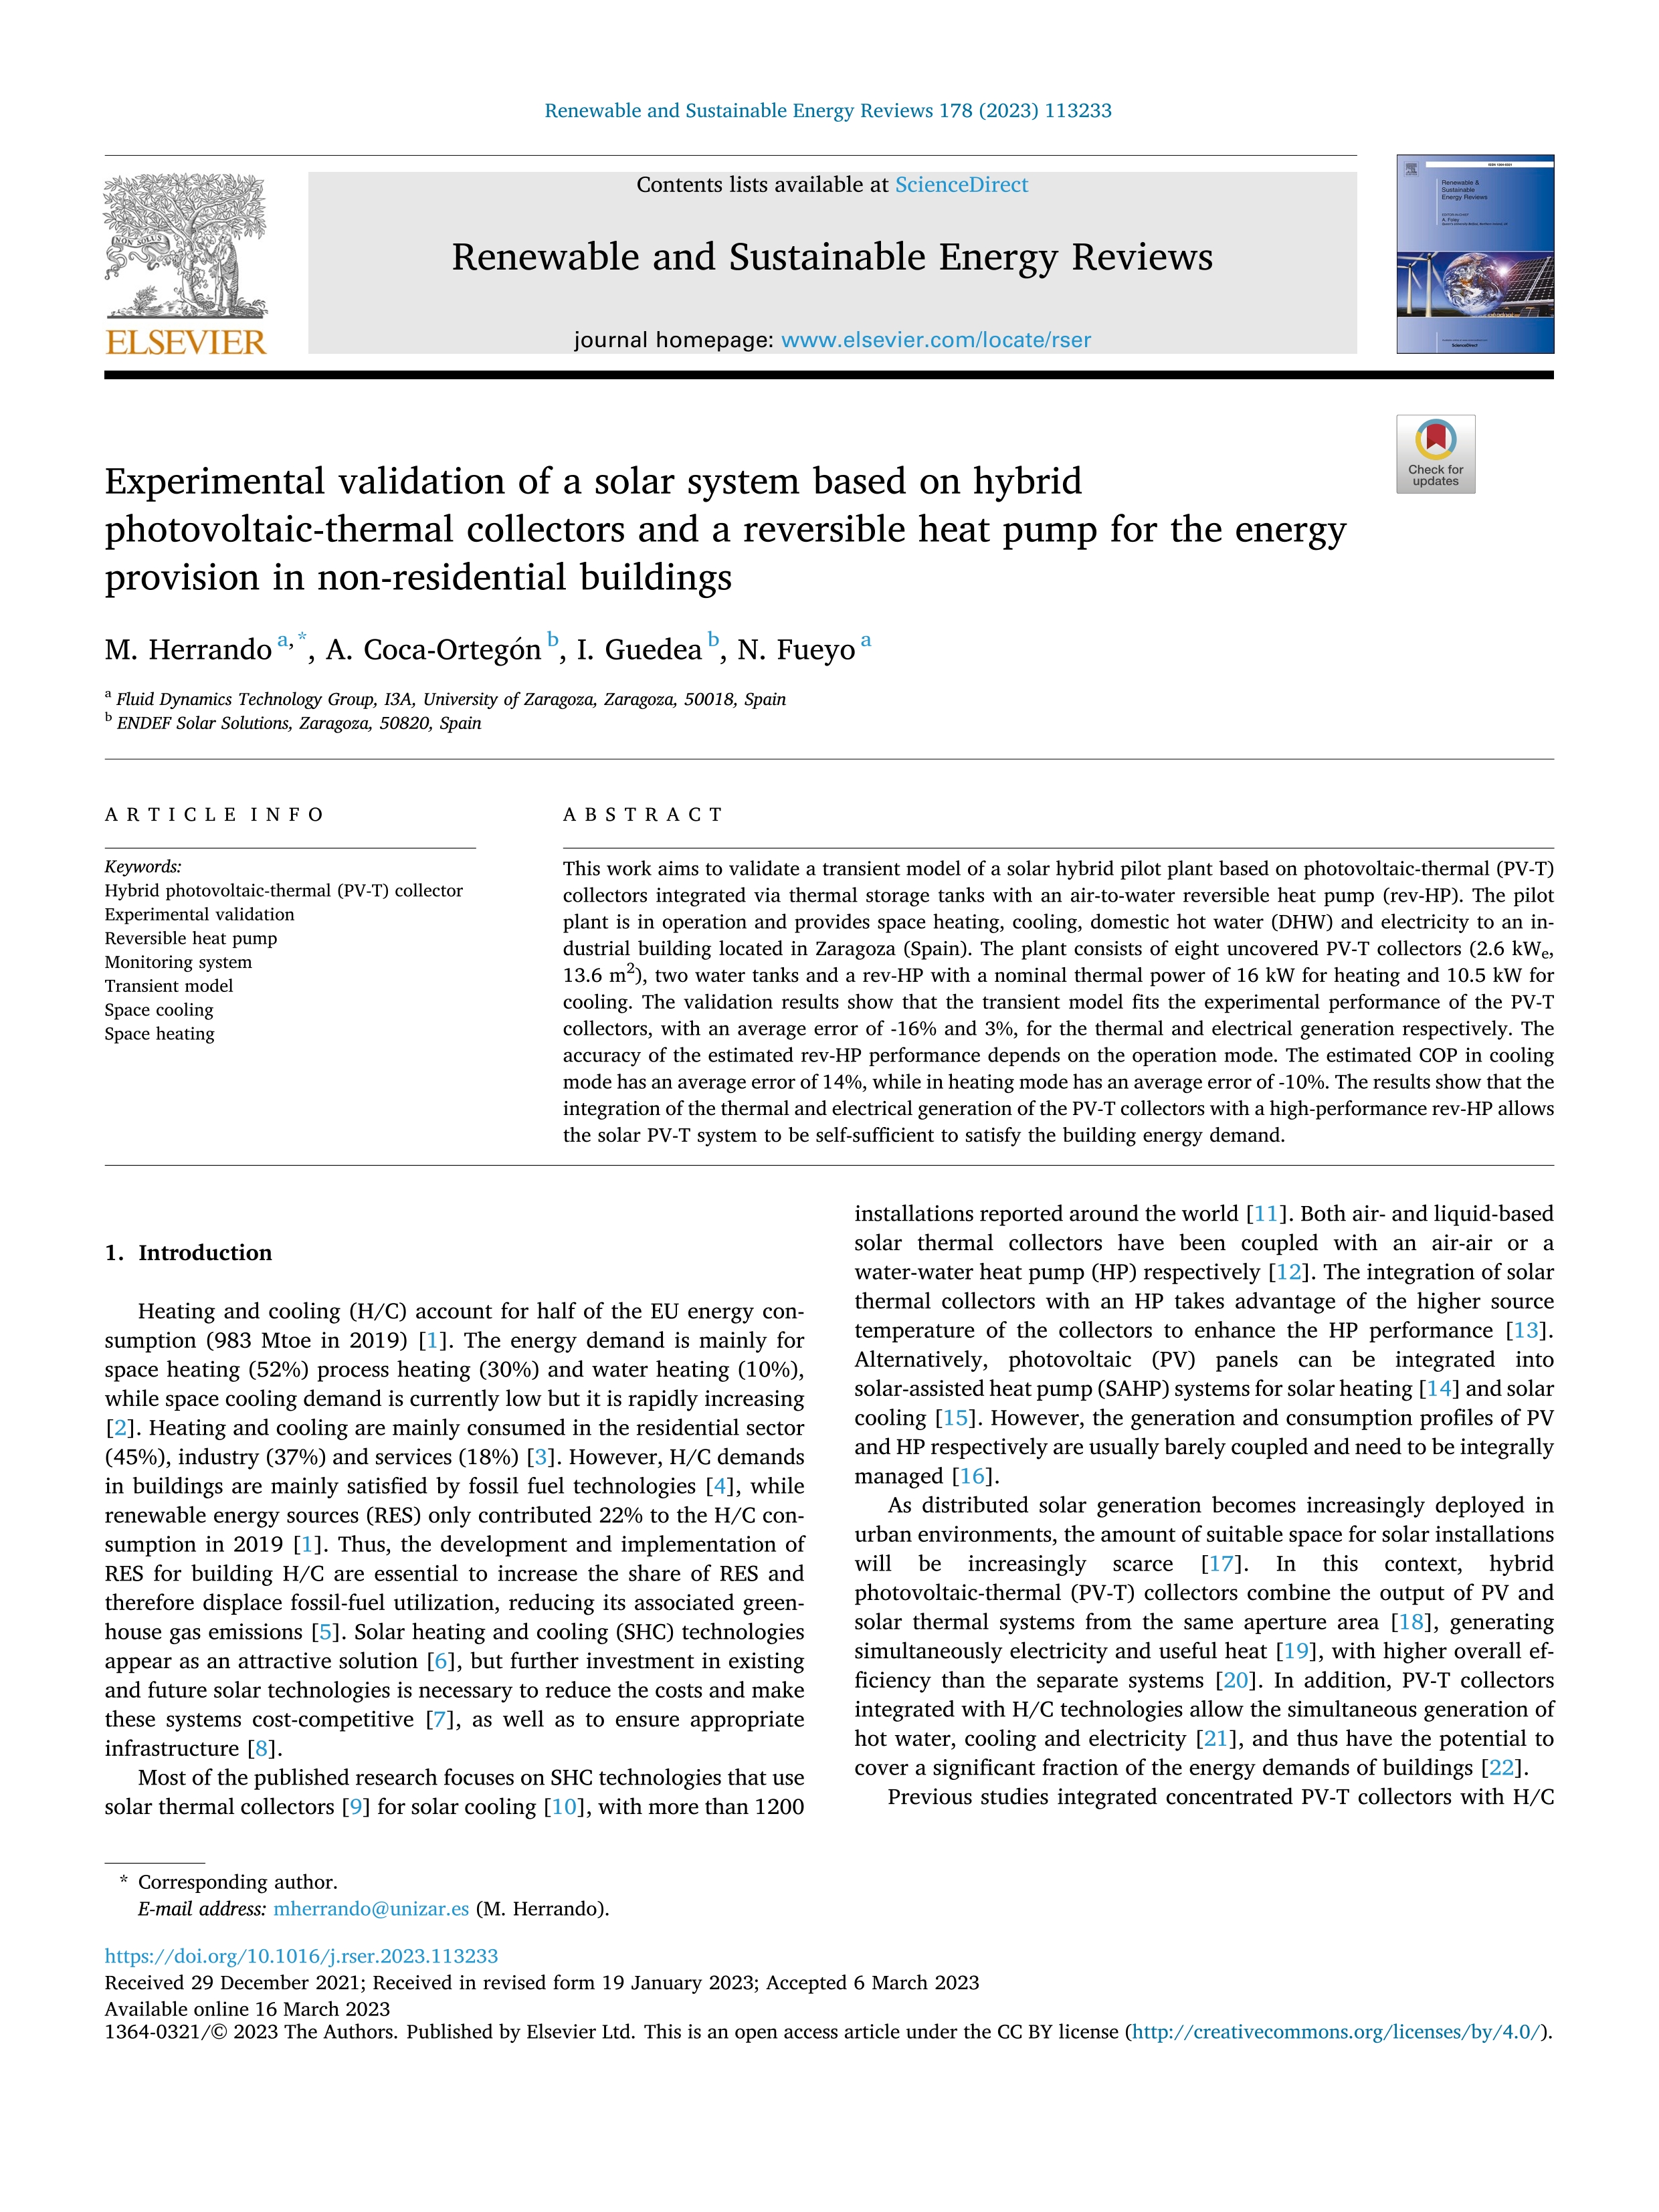 Experimental validation of a solar system based on hybrid photovoltaic-thermal collectors and a reversible heat pump for the energy provision in non-residential buildings